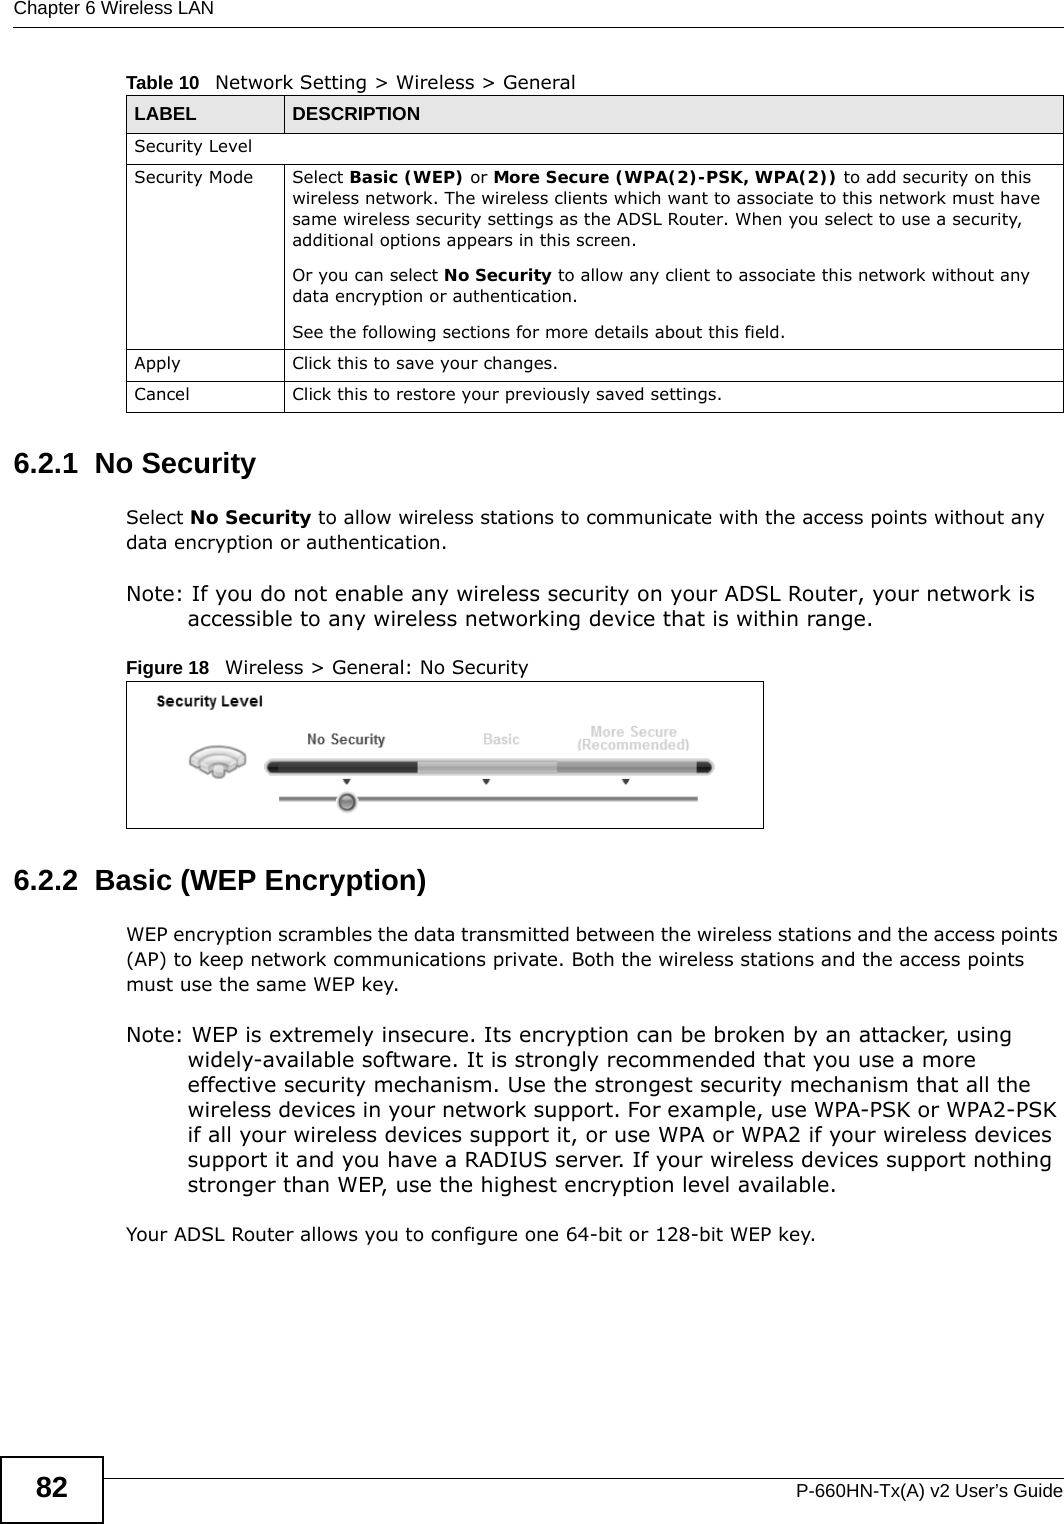 Chapter 6 Wireless LANP-660HN-Tx(A) v2 User’s Guide826.2.1  No SecuritySelect No Security to allow wireless stations to communicate with the access points without any data encryption or authentication.Note: If you do not enable any wireless security on your ADSL Router, your network is accessible to any wireless networking device that is within range.Figure 18   Wireless &gt; General: No Security6.2.2  Basic (WEP Encryption)WEP encryption scrambles the data transmitted between the wireless stations and the access points (AP) to keep network communications private. Both the wireless stations and the access points must use the same WEP key.Note: WEP is extremely insecure. Its encryption can be broken by an attacker, using widely-available software. It is strongly recommended that you use a more effective security mechanism. Use the strongest security mechanism that all the wireless devices in your network support. For example, use WPA-PSK or WPA2-PSK if all your wireless devices support it, or use WPA or WPA2 if your wireless devices support it and you have a RADIUS server. If your wireless devices support nothing stronger than WEP, use the highest encryption level available.Your ADSL Router allows you to configure one 64-bit or 128-bit WEP key.Security LevelSecurity Mode Select Basic (WEP) or More Secure (WPA(2)-PSK, WPA(2)) to add security on this wireless network. The wireless clients which want to associate to this network must have same wireless security settings as the ADSL Router. When you select to use a security, additional options appears in this screen.  Or you can select No Security to allow any client to associate this network without any data encryption or authentication.See the following sections for more details about this field.Apply Click this to save your changes.Cancel Click this to restore your previously saved settings.Table 10   Network Setting &gt; Wireless &gt; GeneralLABEL DESCRIPTION